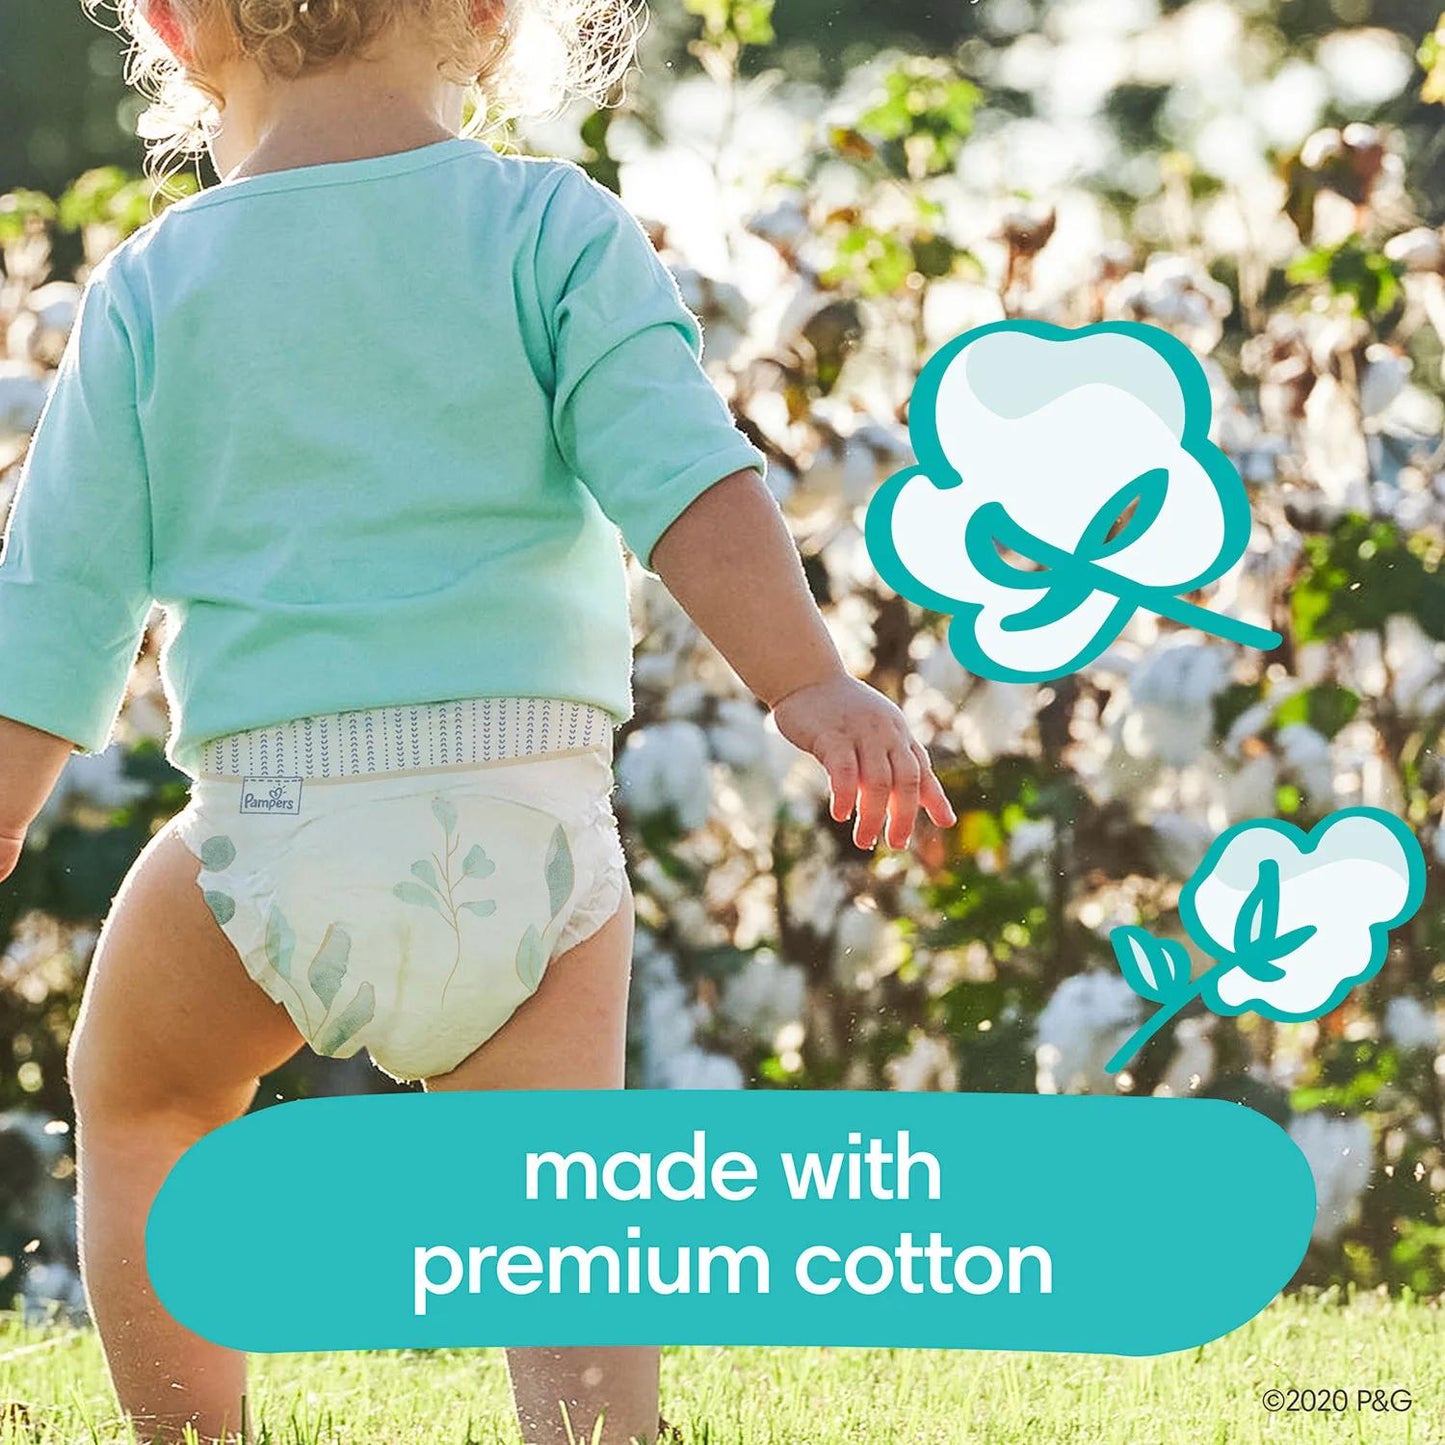 Pampers Pure Protection One-Month Supply Diapers (Sizes 1 - 6)